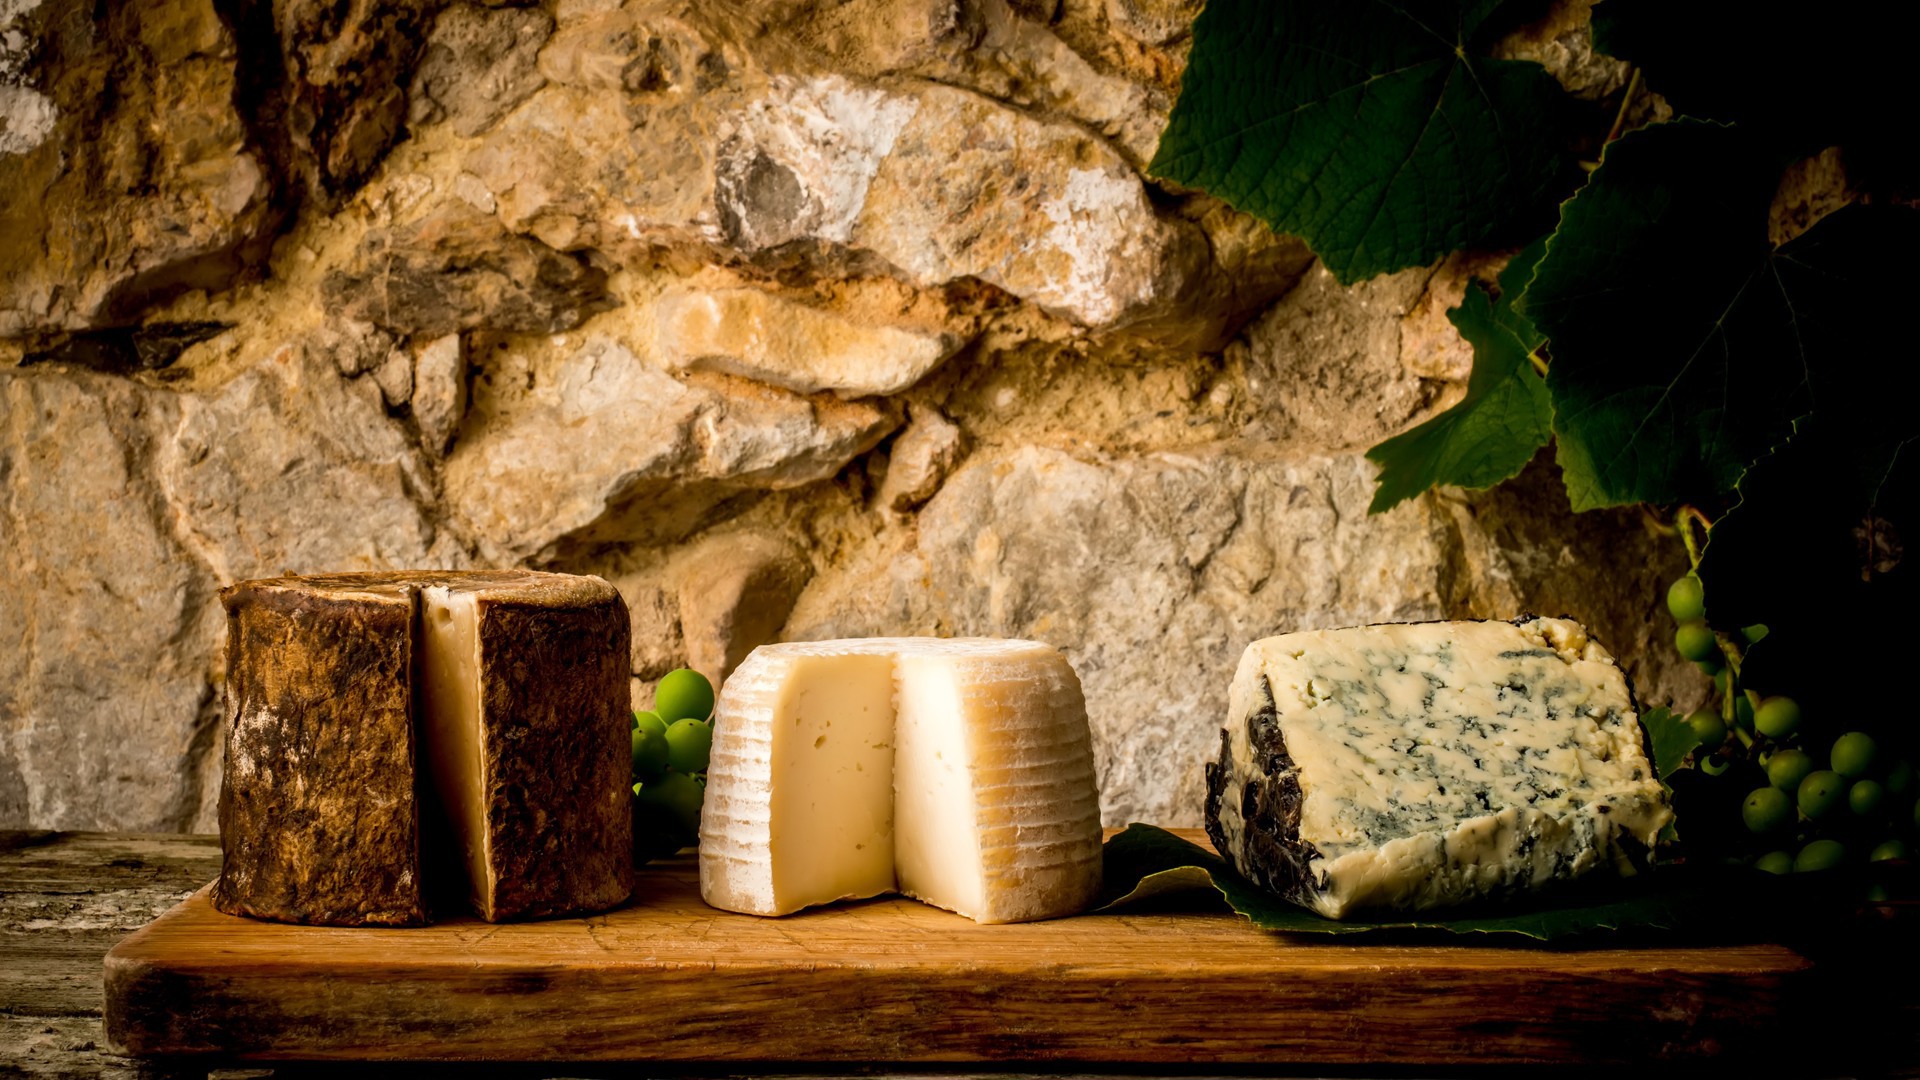 Tip: taste delicious cheeses